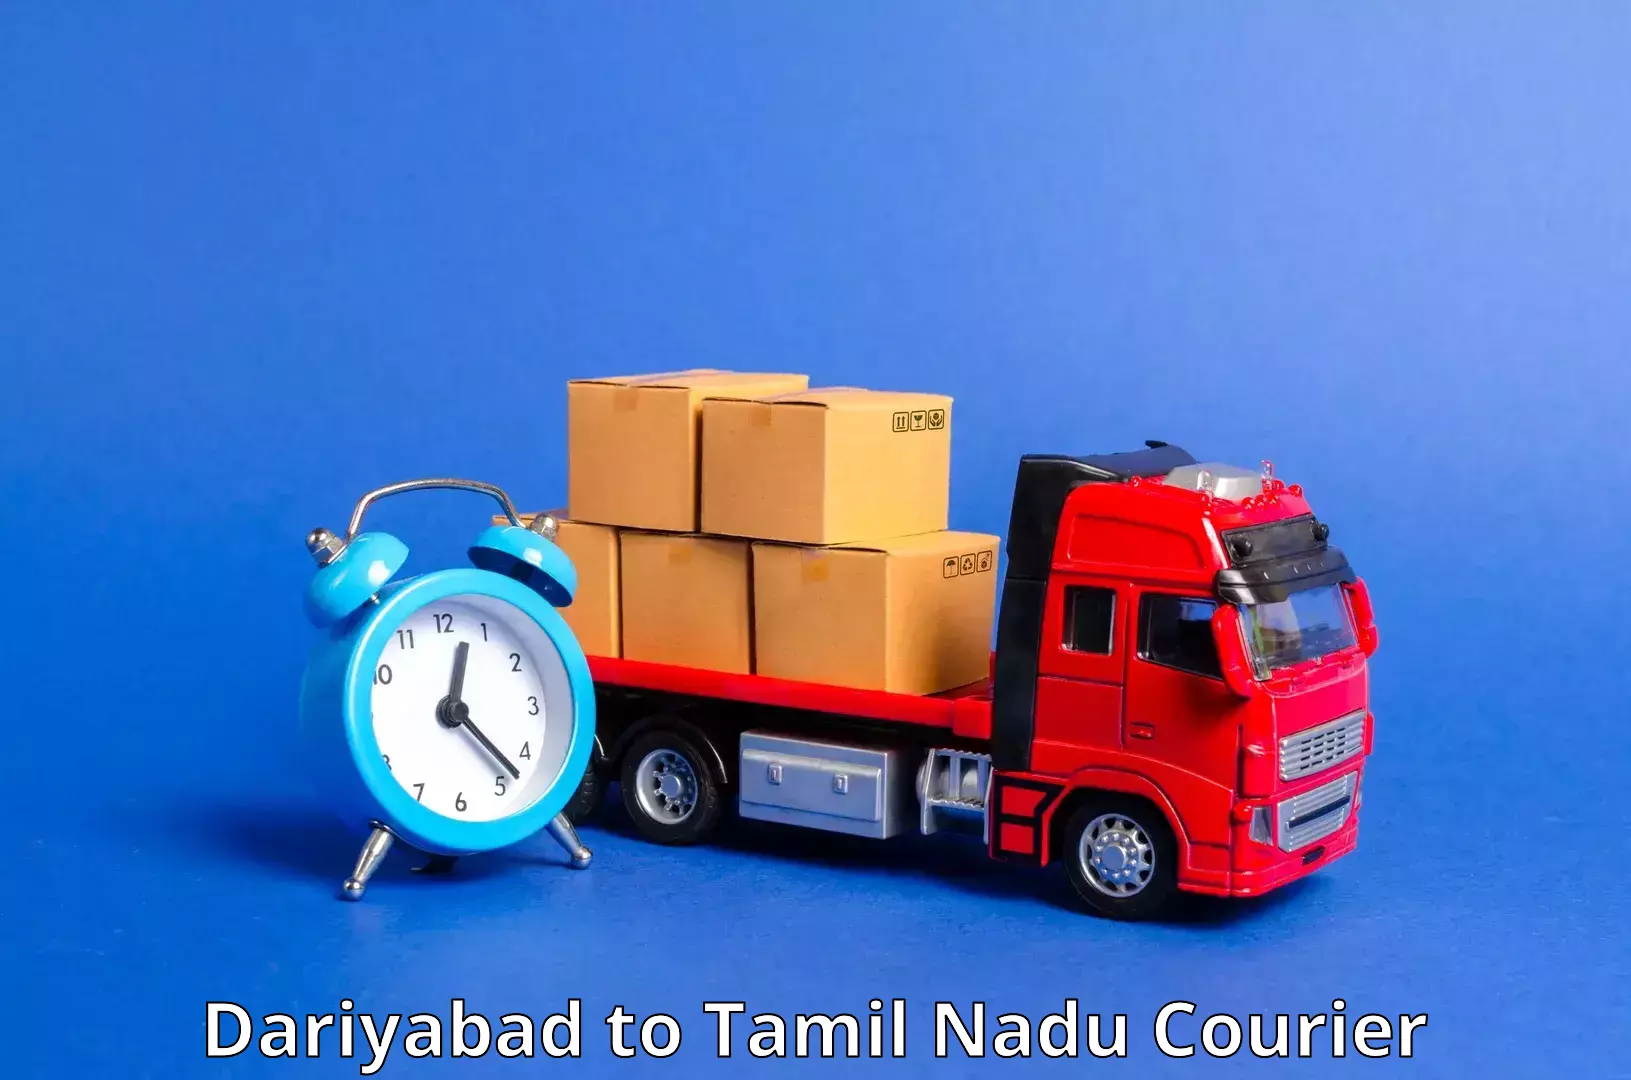 End-to-end delivery in Dariyabad to Tiruchi